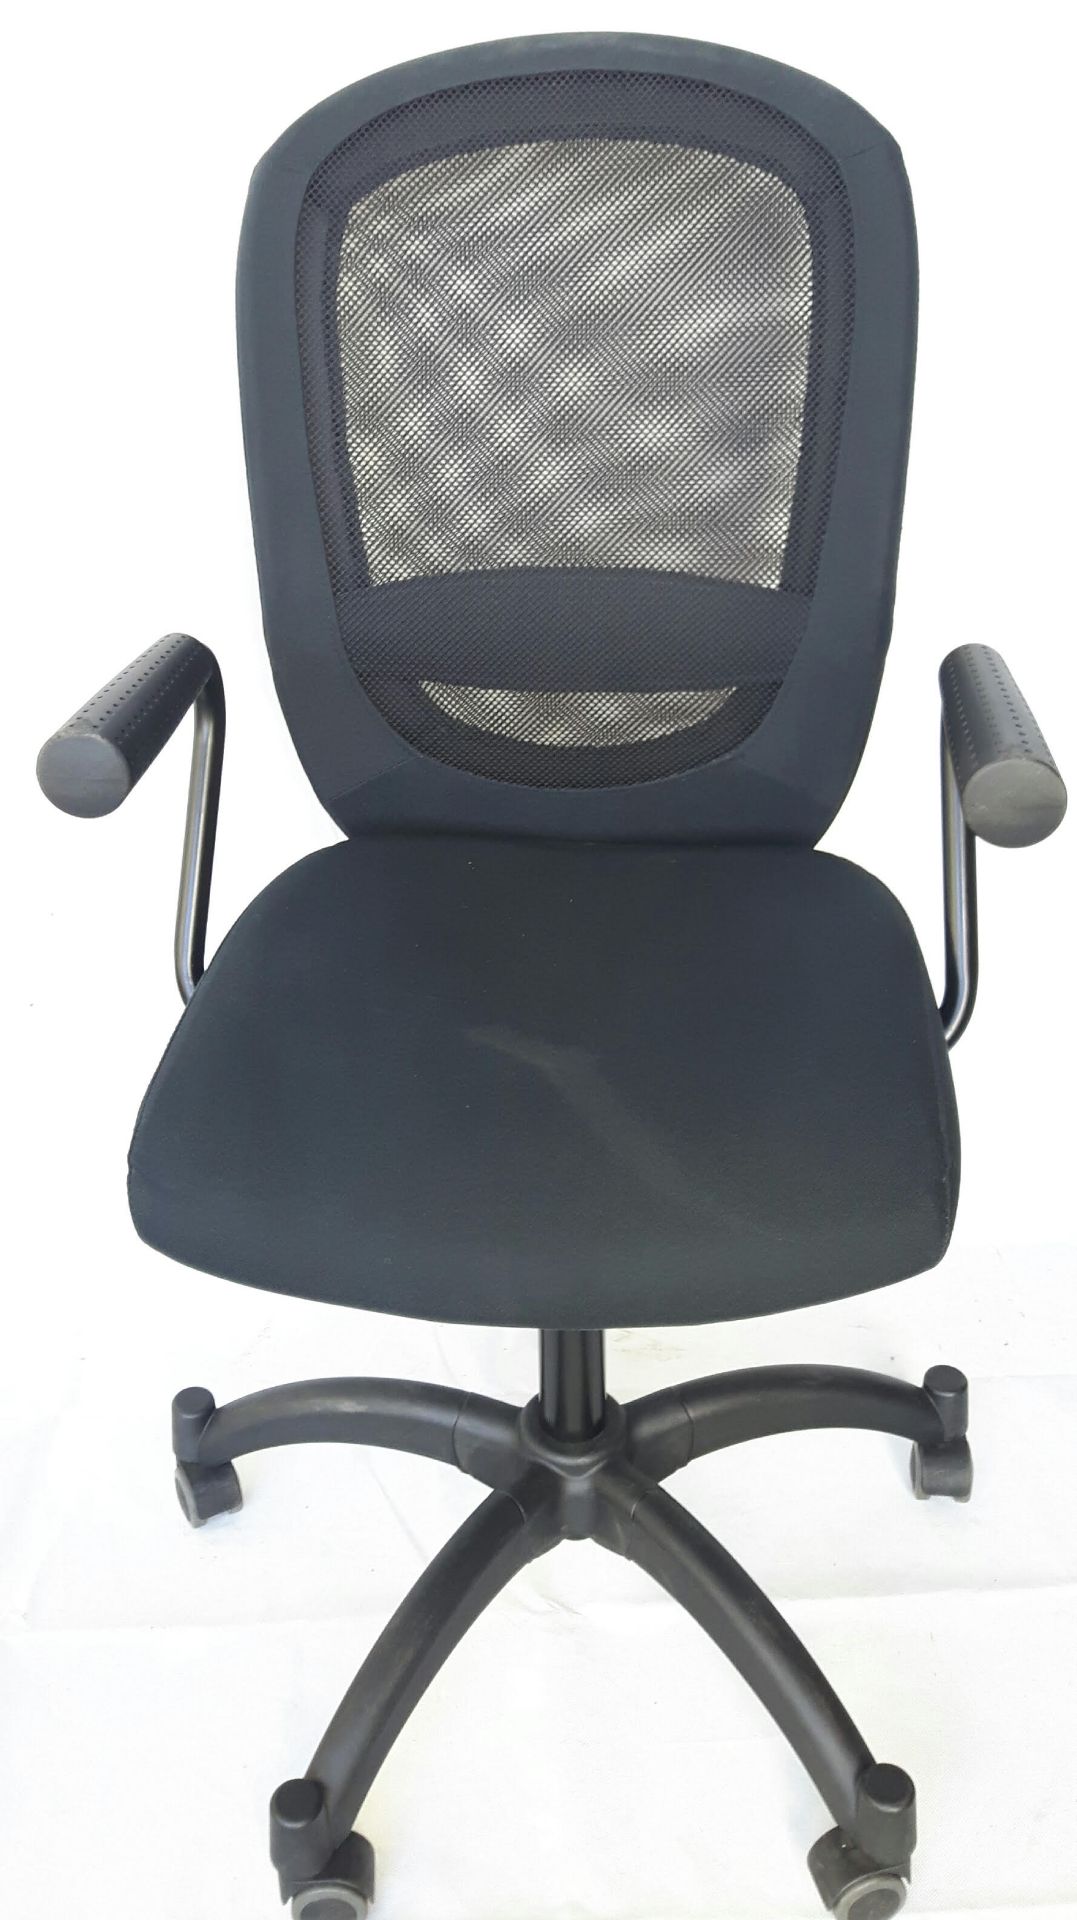 6 x FLINTAN/NOMINELL Swivel chair with armrests - Image 3 of 4